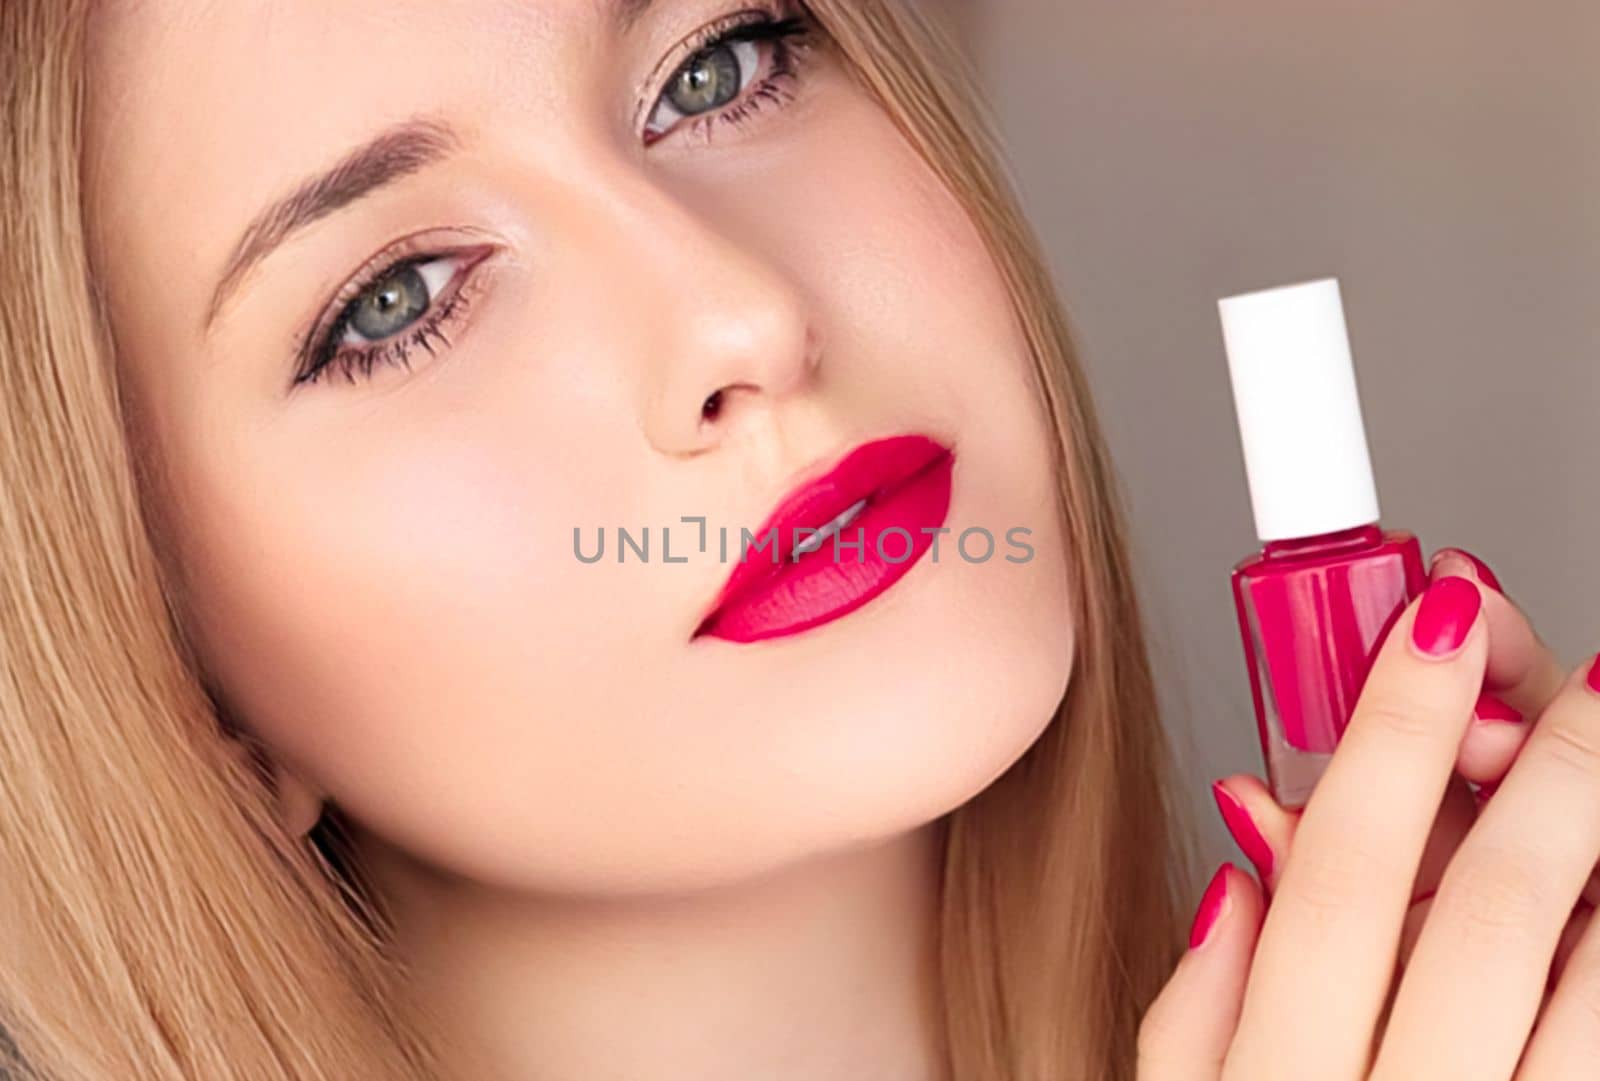 Beauty product, makeup and cosmetics, face portrait of beautiful woman with nail polish, manicure and matching pink lipstick make-up for luxury cosmetic, style and fashion by Anneleven